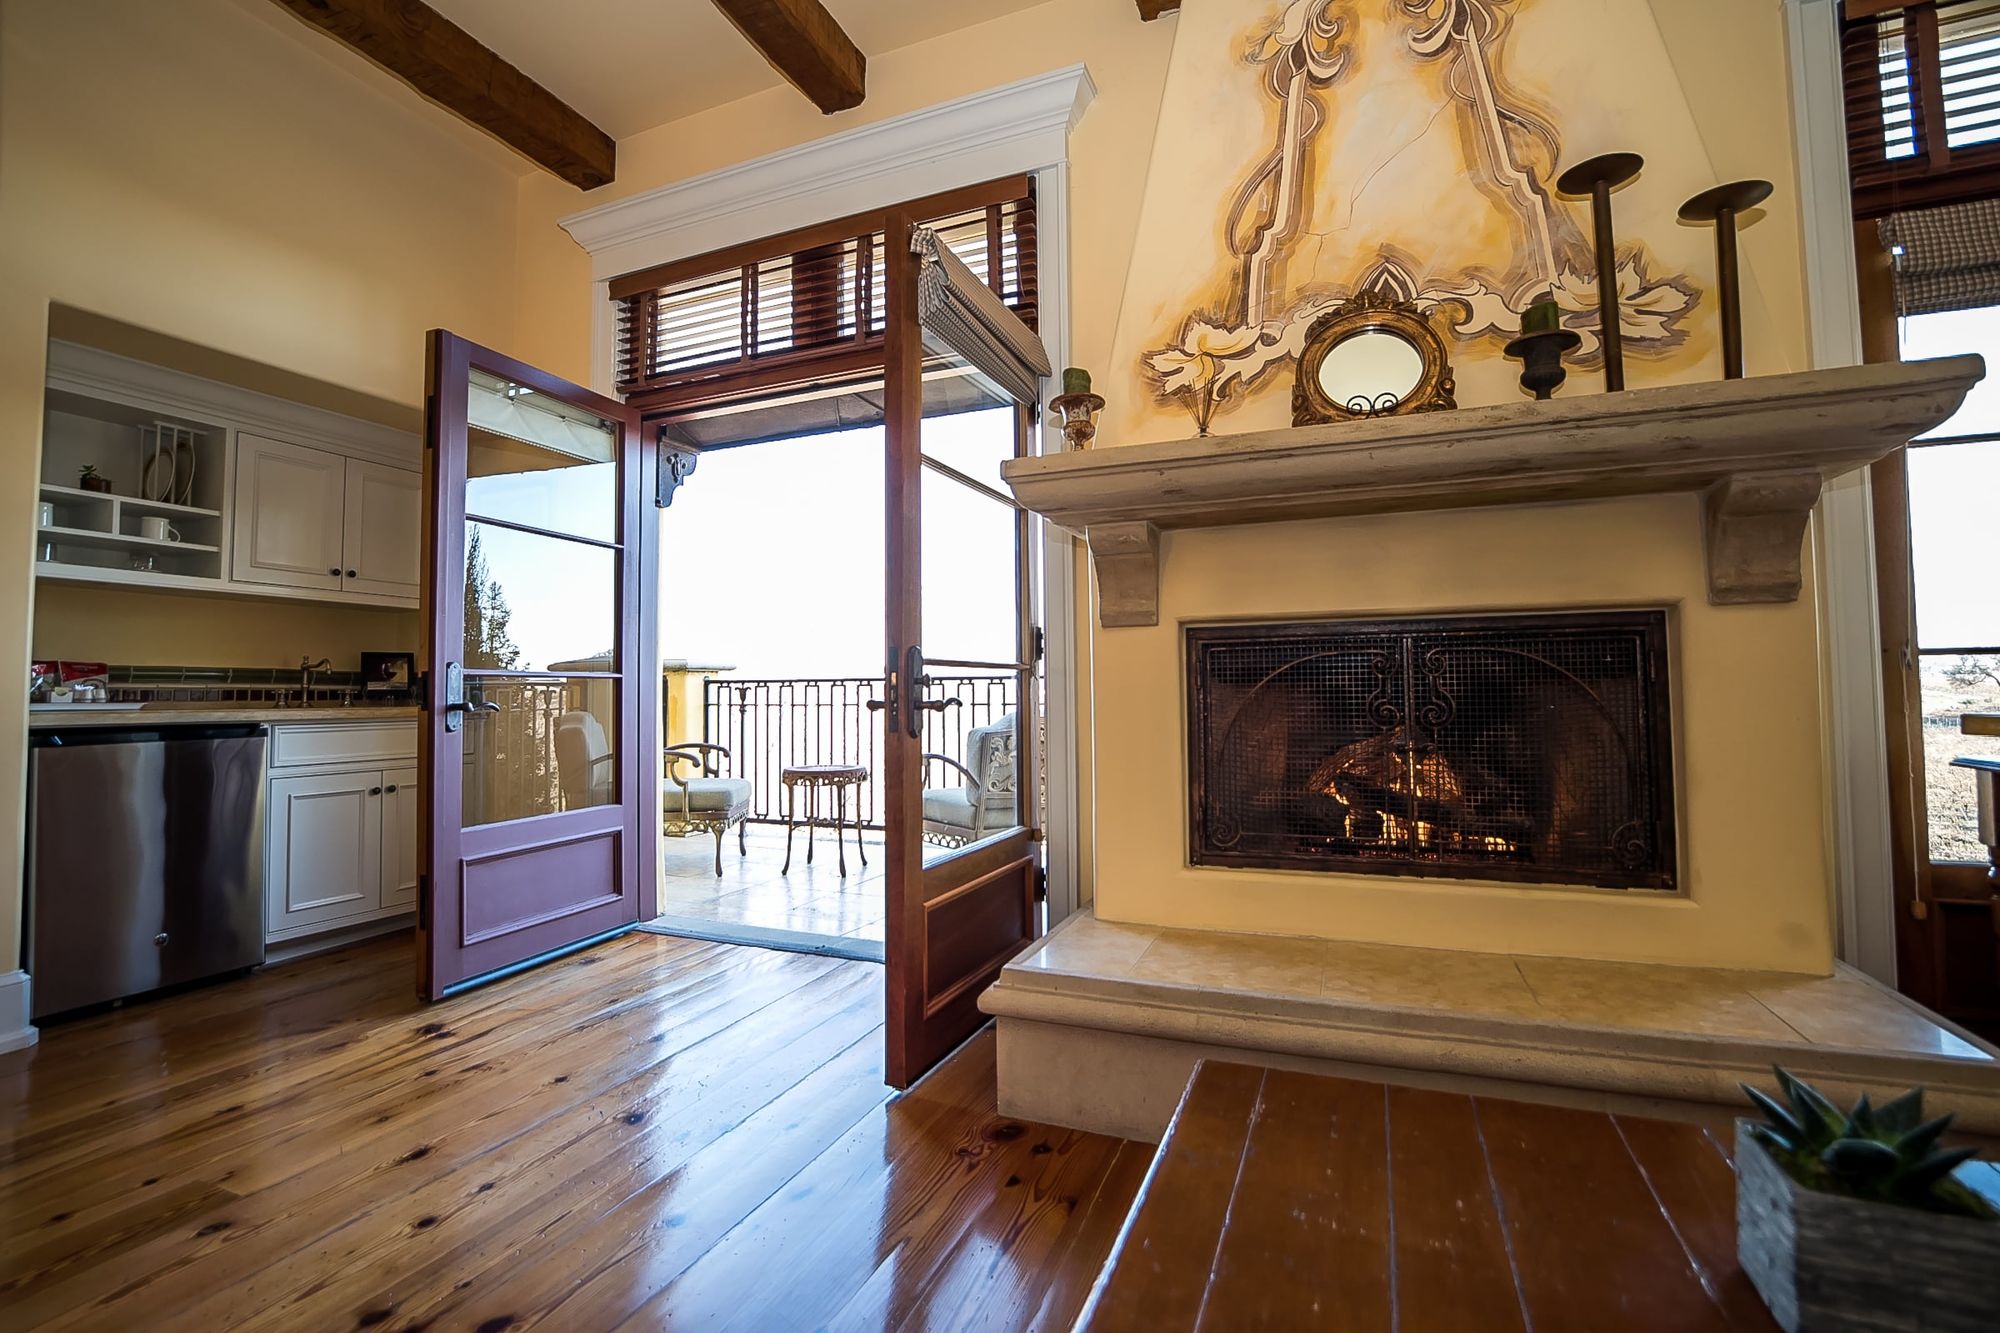 Decorative fireplace with French doors open to the patio to the left and the wet bar behind the door